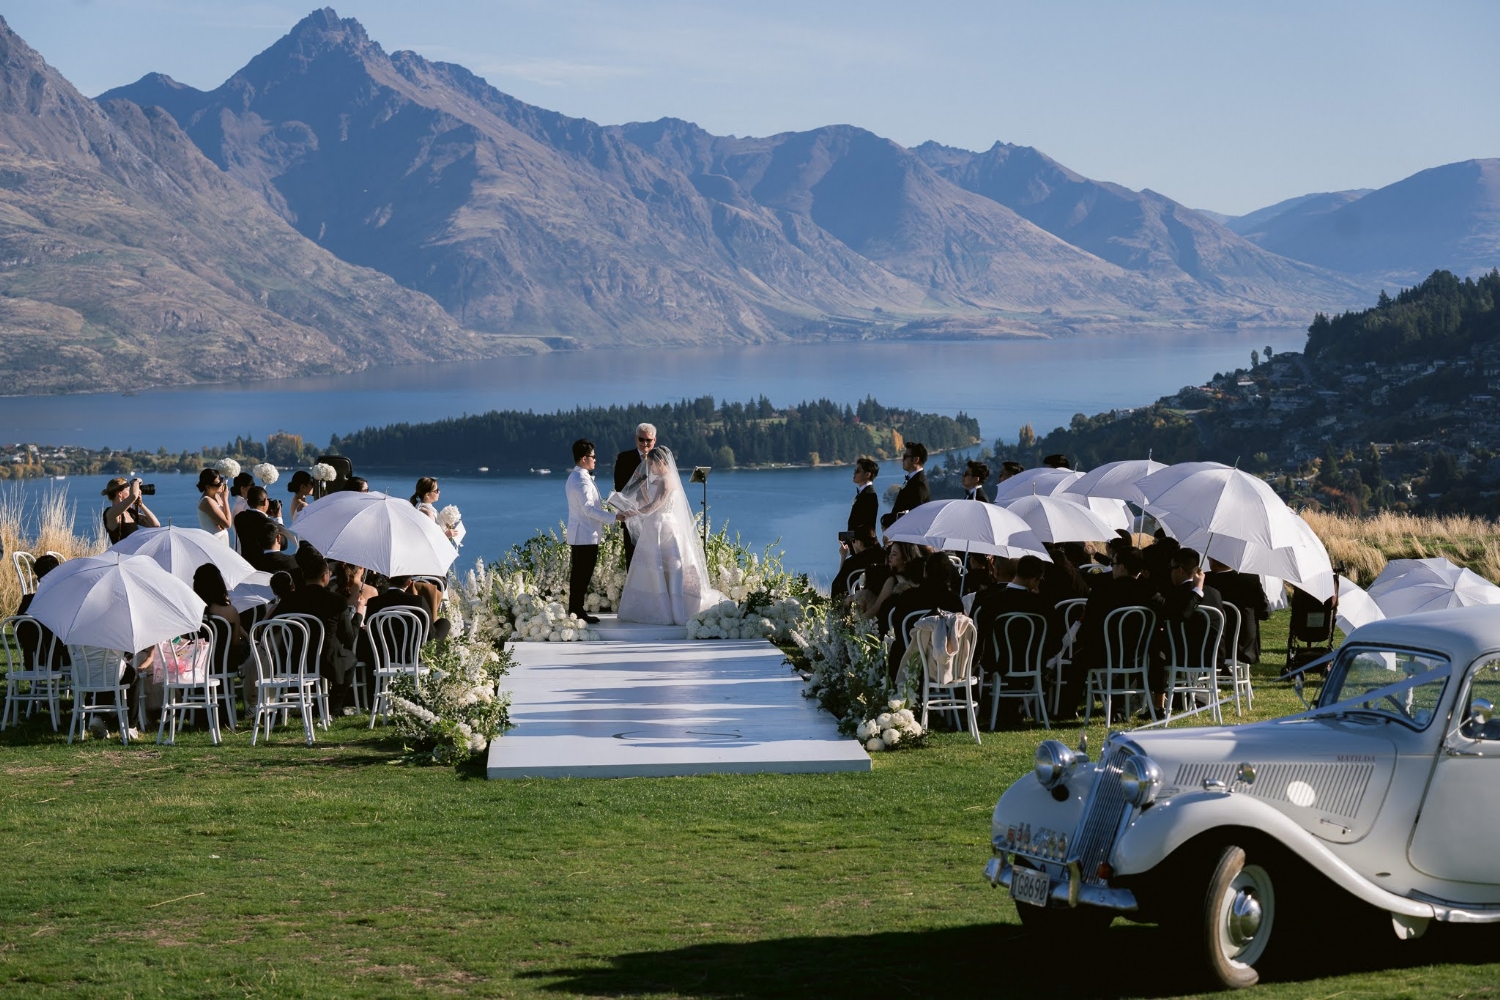 Venue: New Zealand High Country